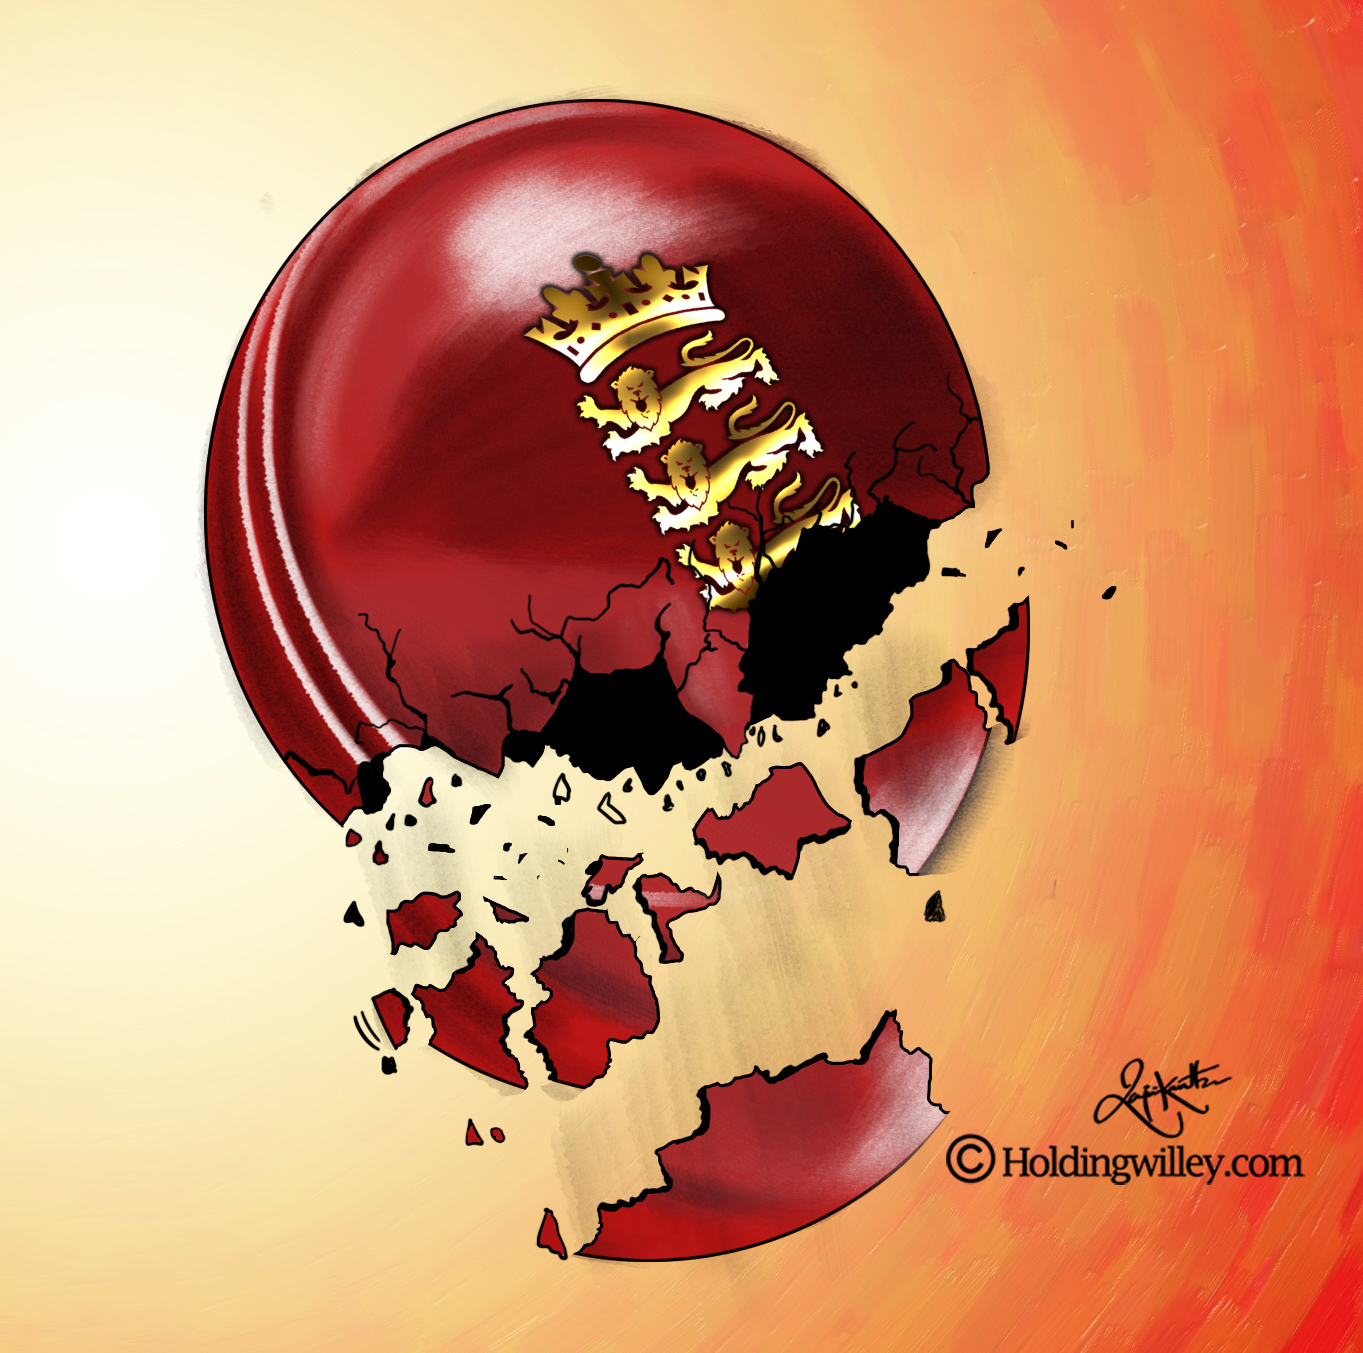 England_Test_Ashes_bowling_cricket